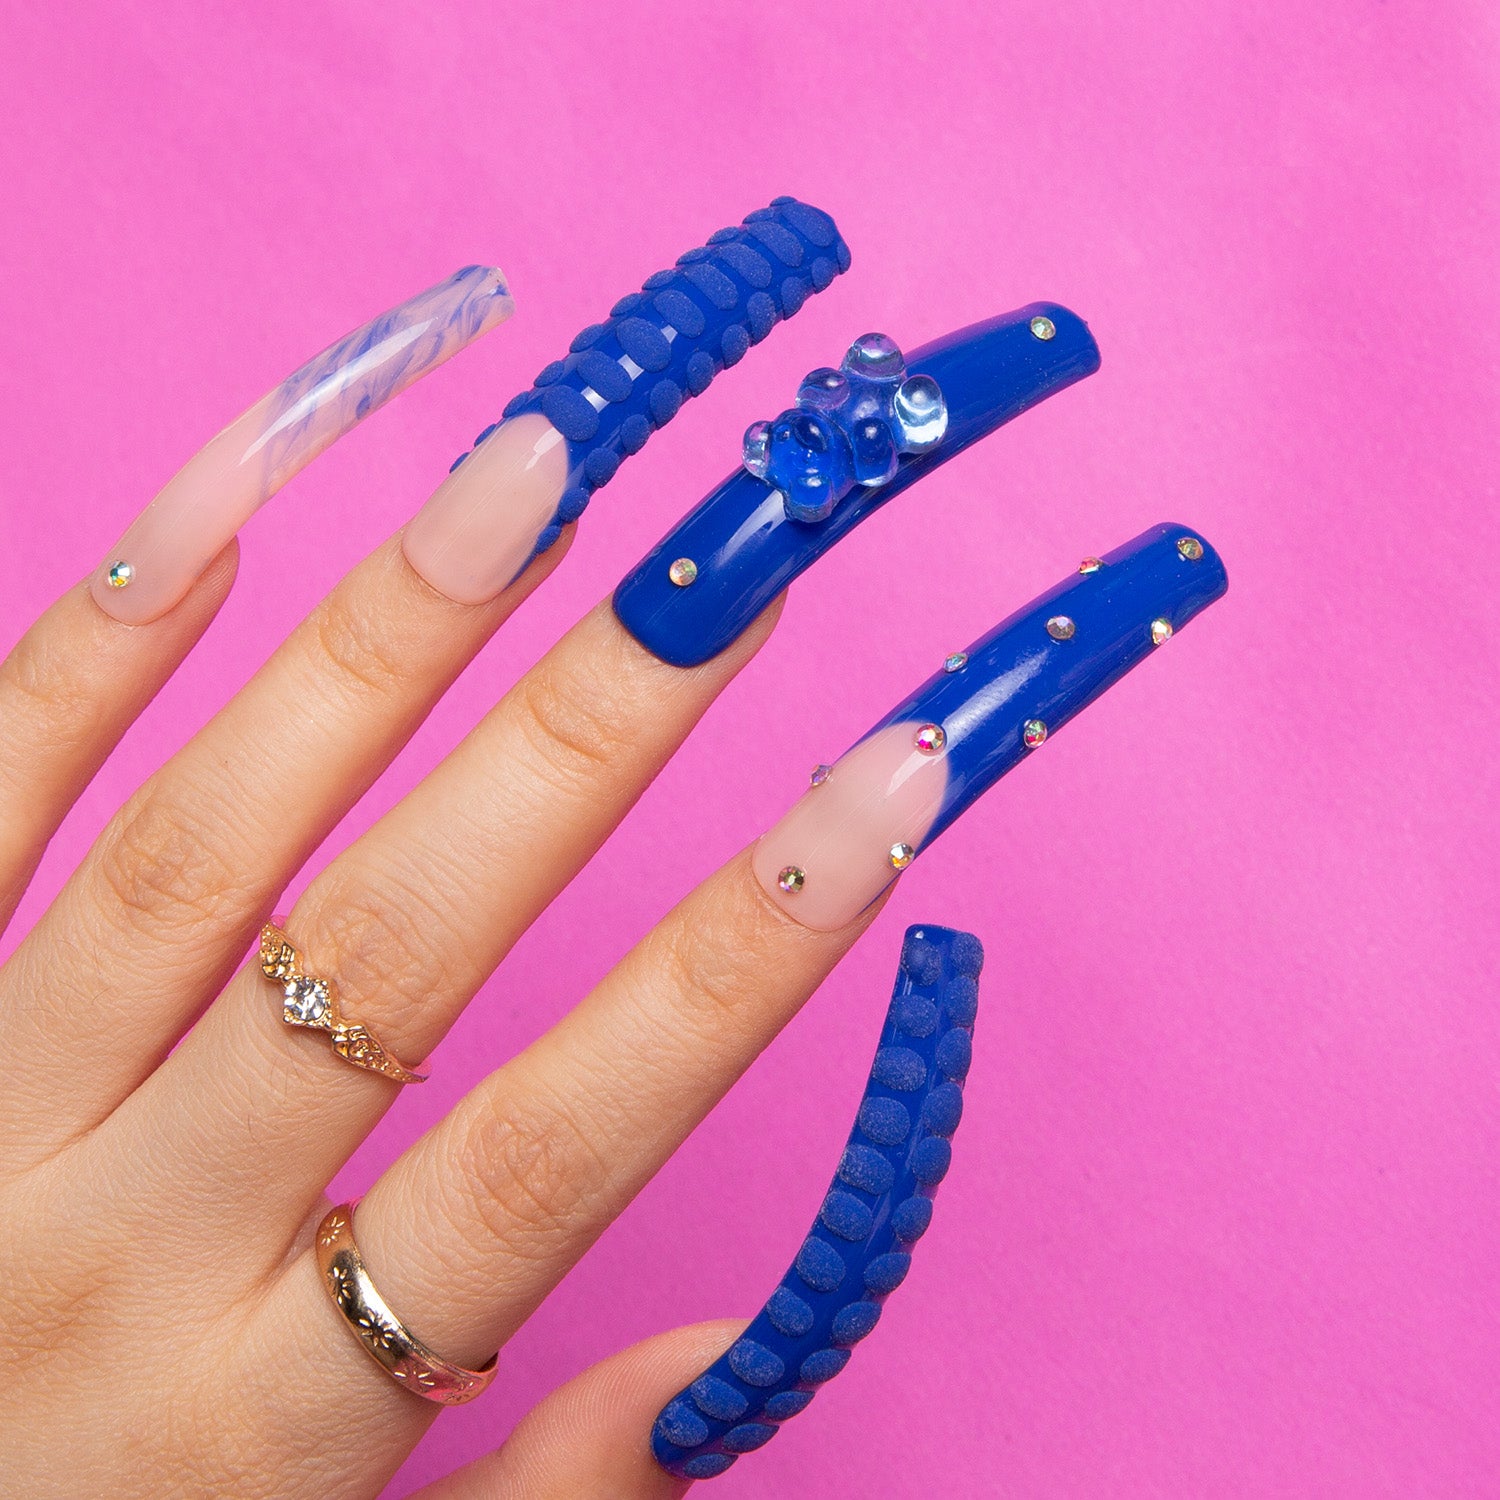 Hand displaying 'Little Blue Bear' rhinestone French tip press-on nails in curve shape, featuring blue gummy bears, shiny rhinestones, and hand-drawn 3D dots on a pink background.